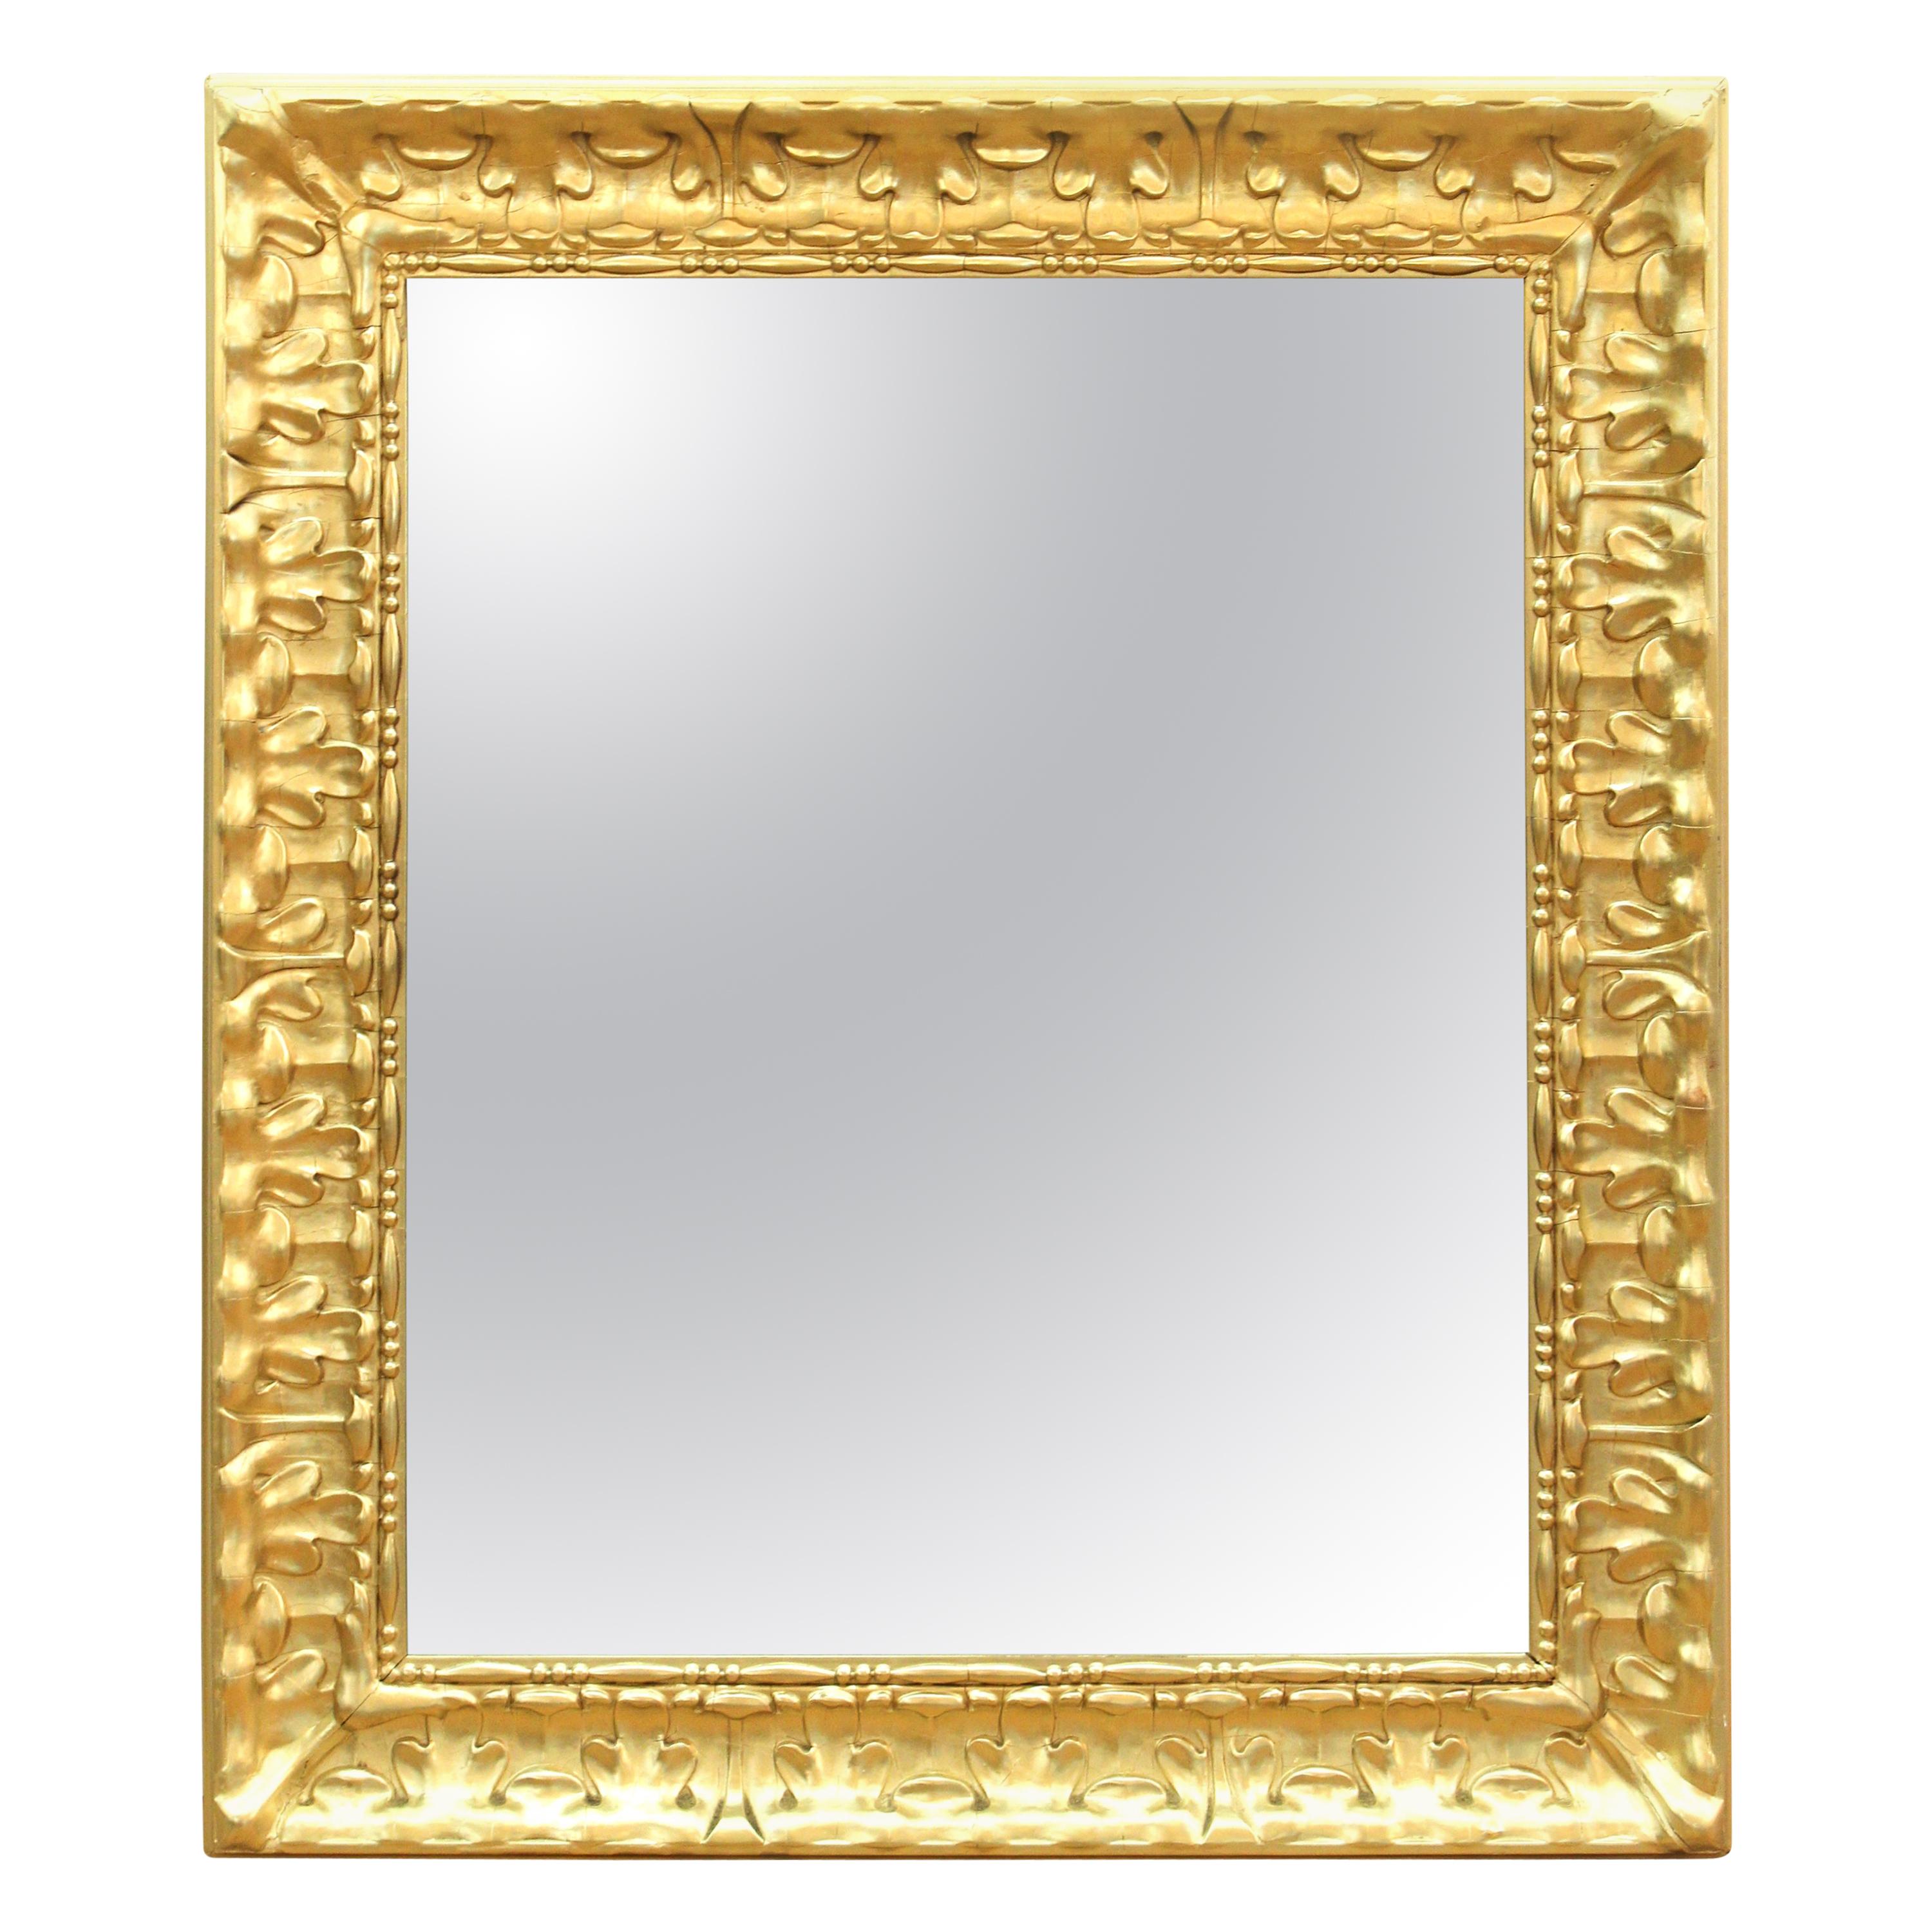 Neoclassical Revival Style Carved Giltwood Mirror